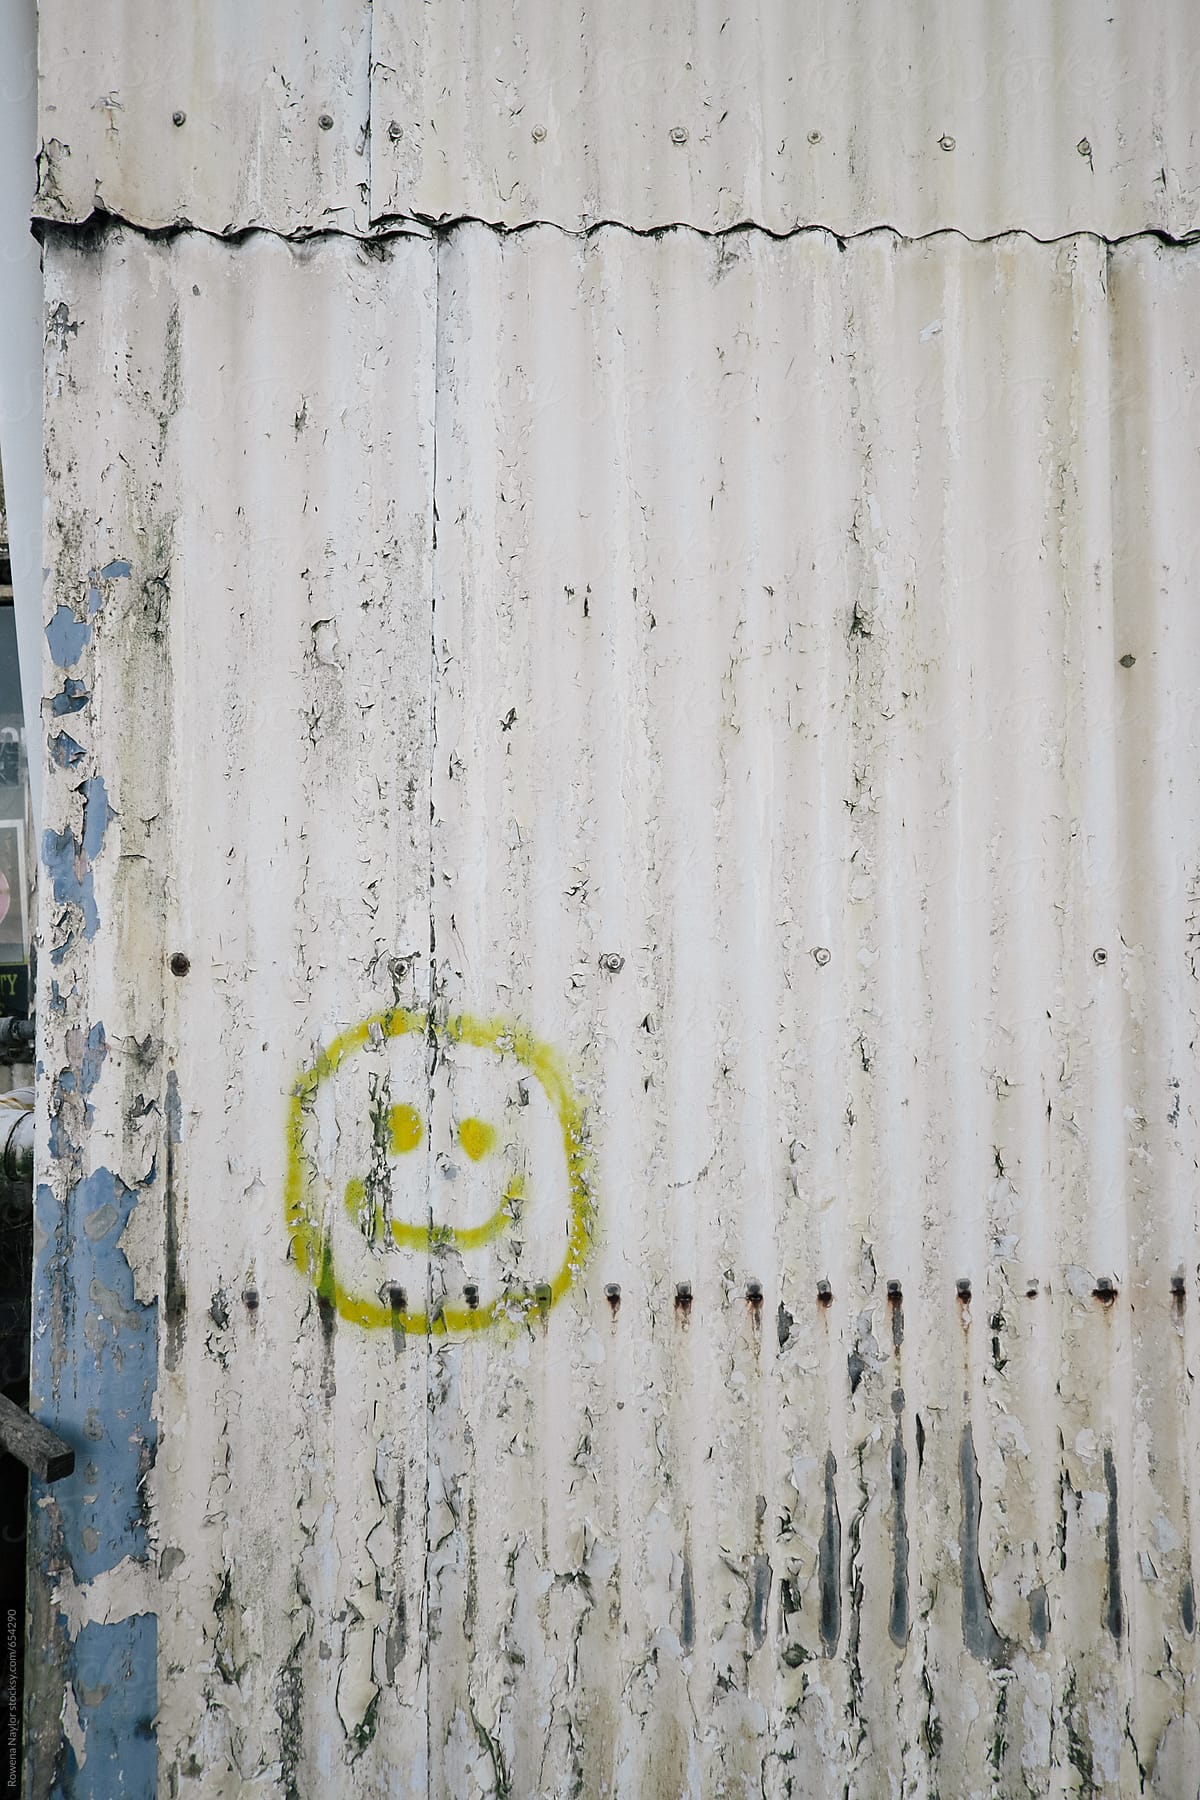 Smiley Face painted on old corrugated barn